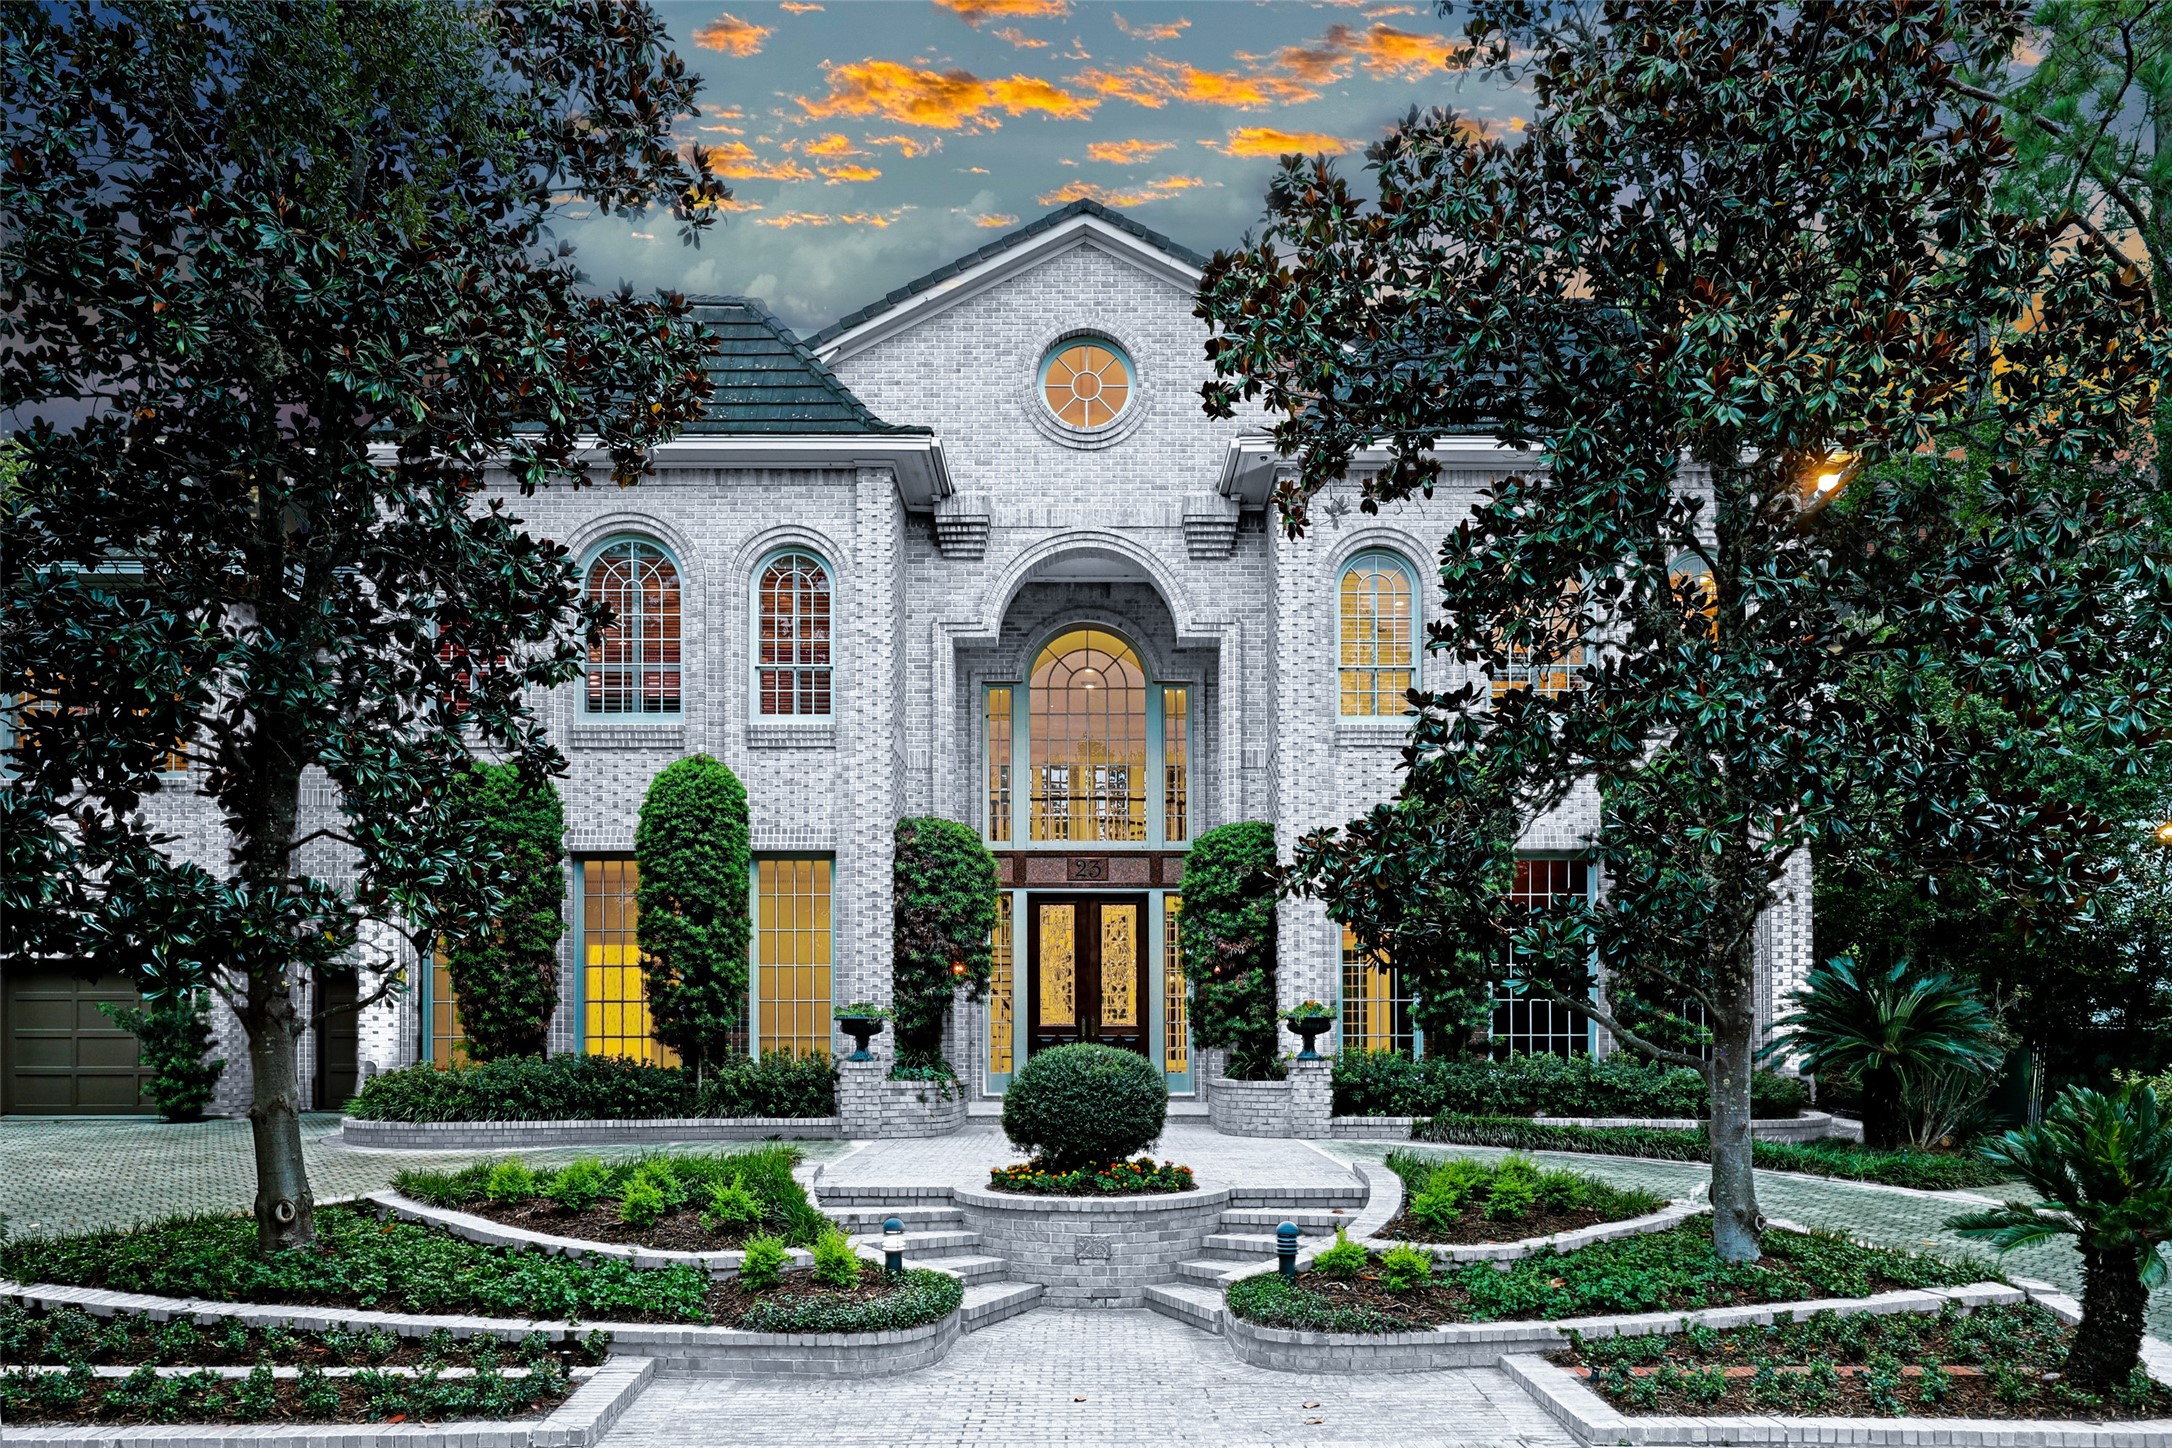 Nestled within the prestigious River Oaks community, this elegant residence represents the epitome of luxury living. Spanning nearly 9,000' with 5-6 BD of meticulously designed spaces, it sits majestically on an expansive 17,635-square-foot lot, offering an estate-like presence in one of Houston's most affluent neighborhoods.

